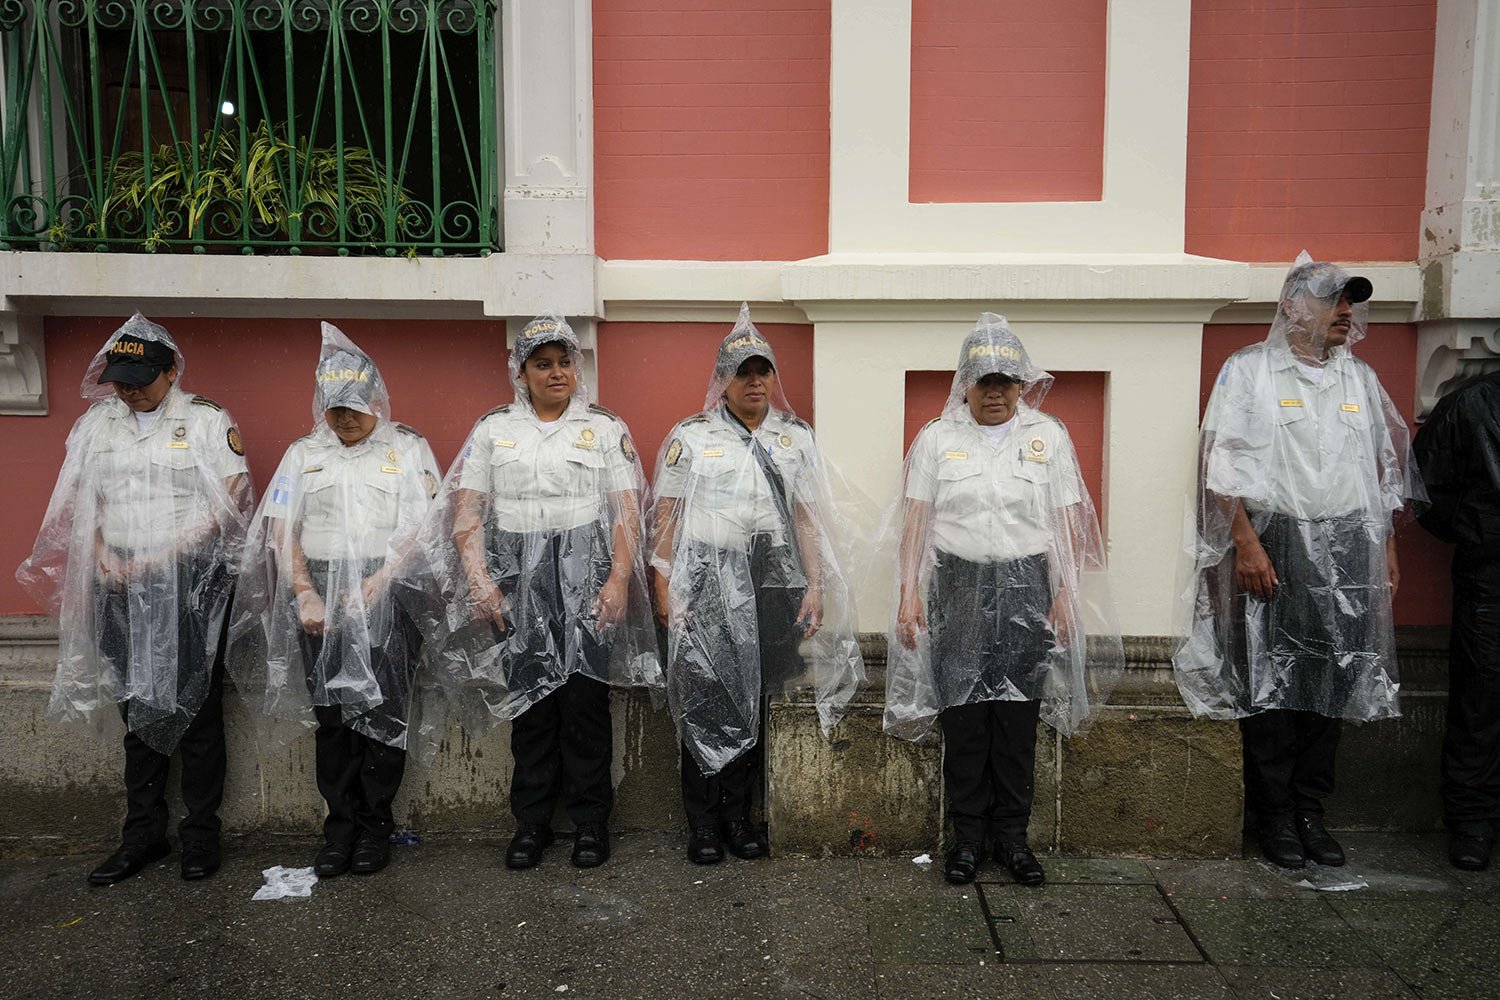  Police stand guard outside the Electoral Court building while demonstrators march to support the electoral process, as the chief justice of the Supreme Court issued an order blocking certification of the presidential election results, in Guatemala C